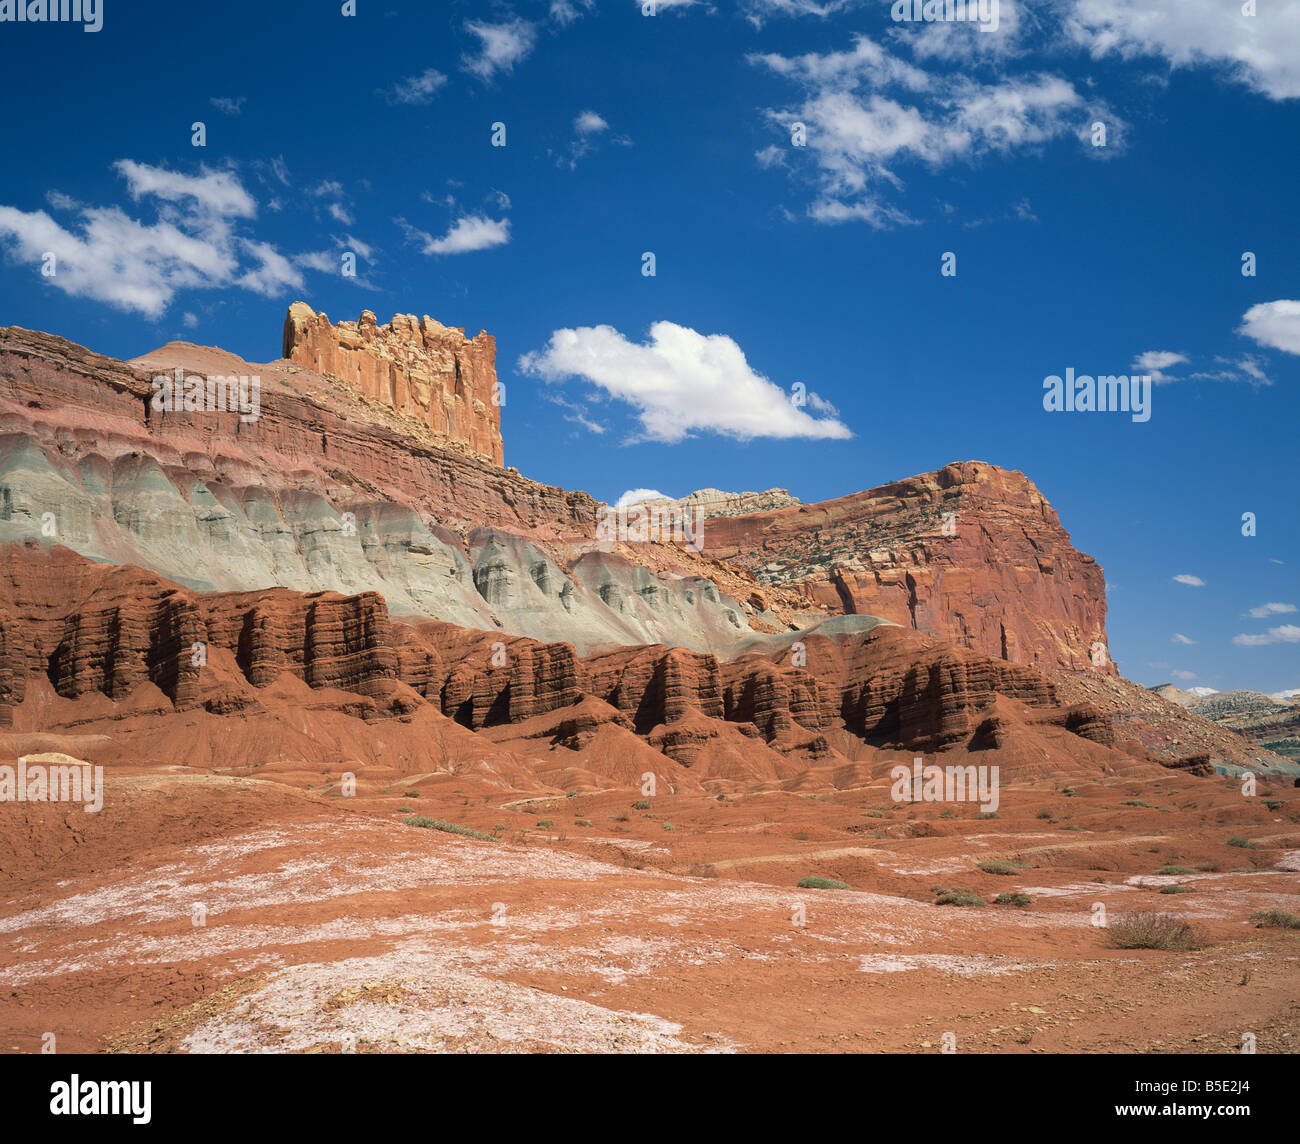 Coloured rock formations and cliffs in the Capital Reef National Park in Utah USA R Rainford Stock Photo